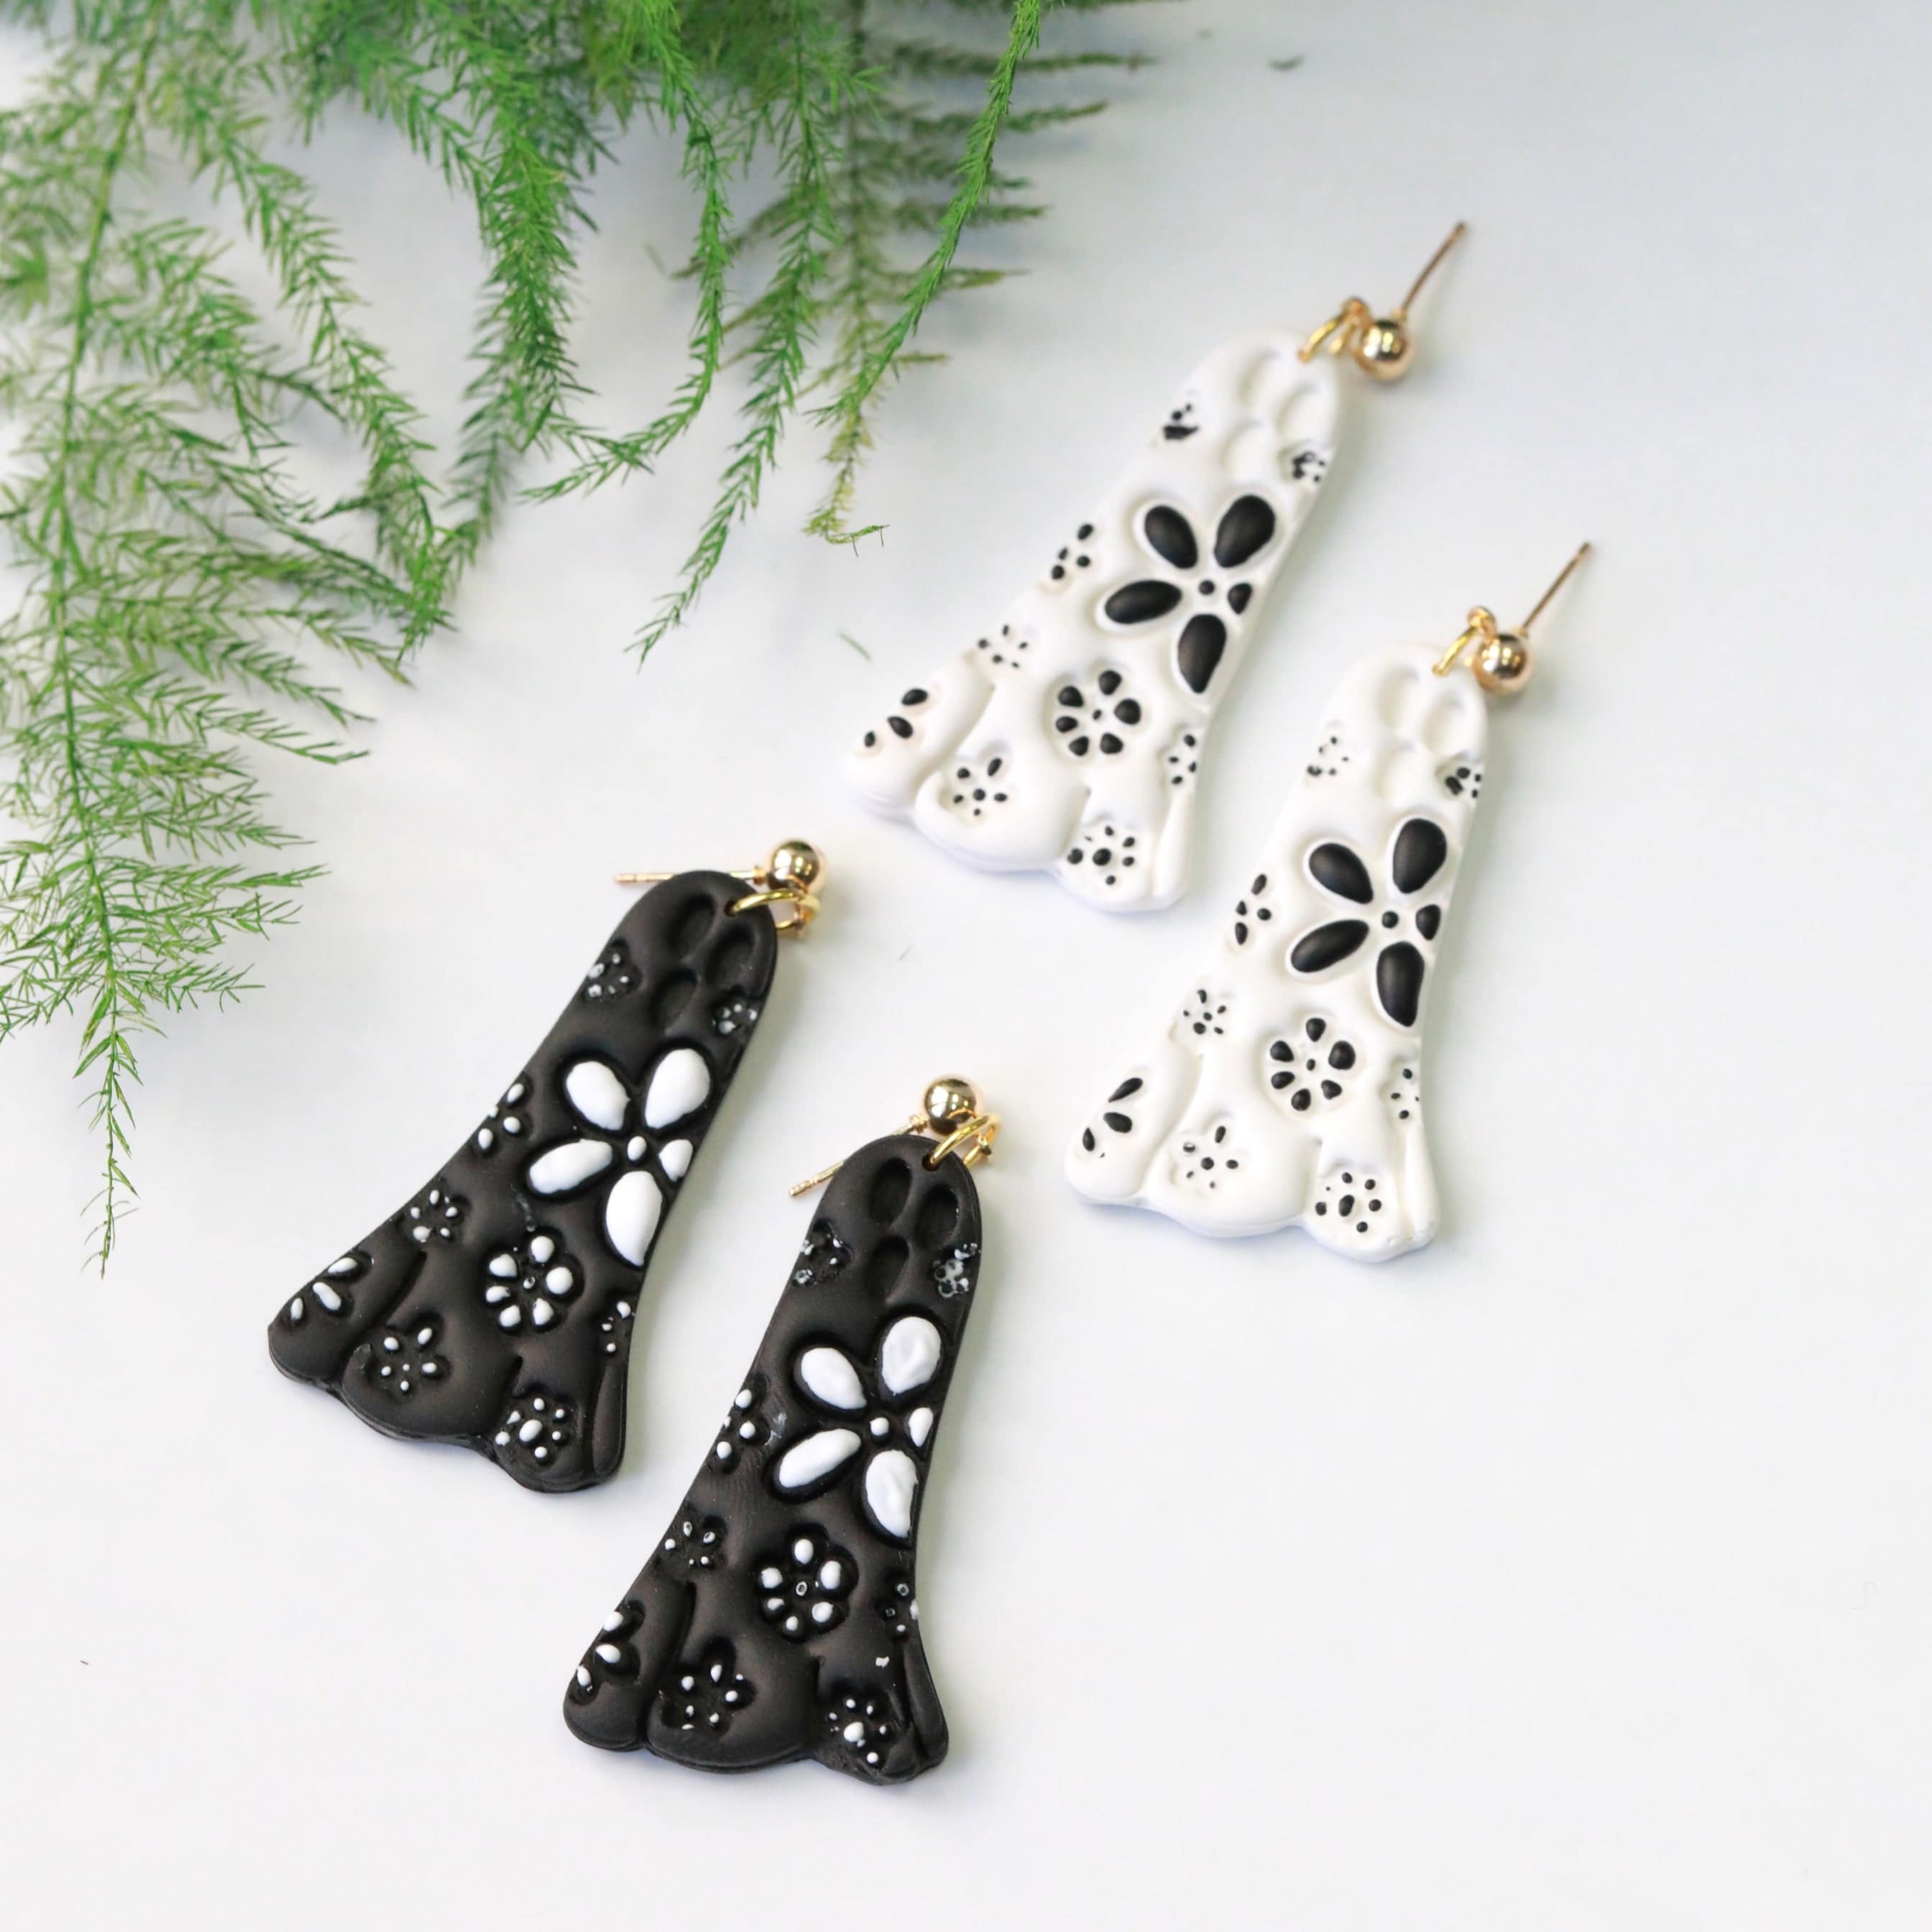 daisy ghost clay earrings in black and white by everything ky and i pair image top 